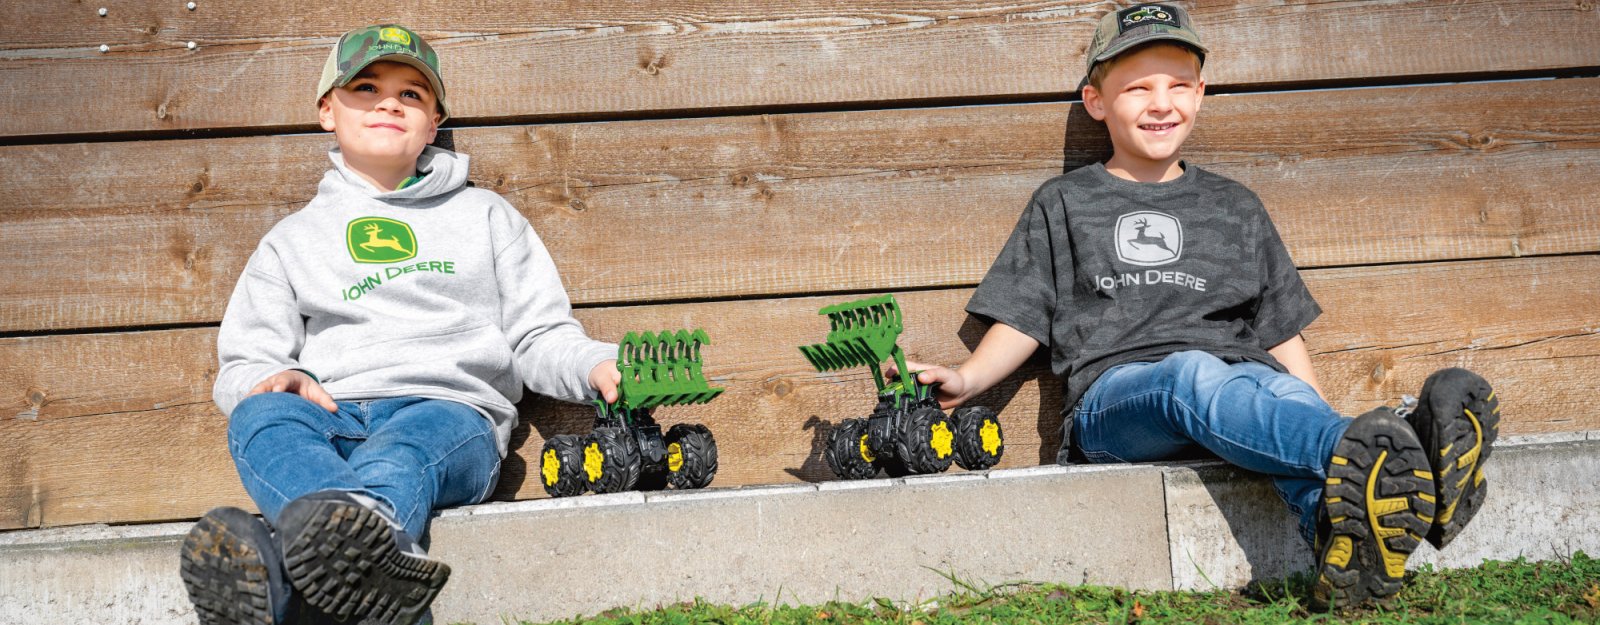 Get Your Christmas Revving with John Deere, Stihl and Husqvarna Gifts from Balmers GM